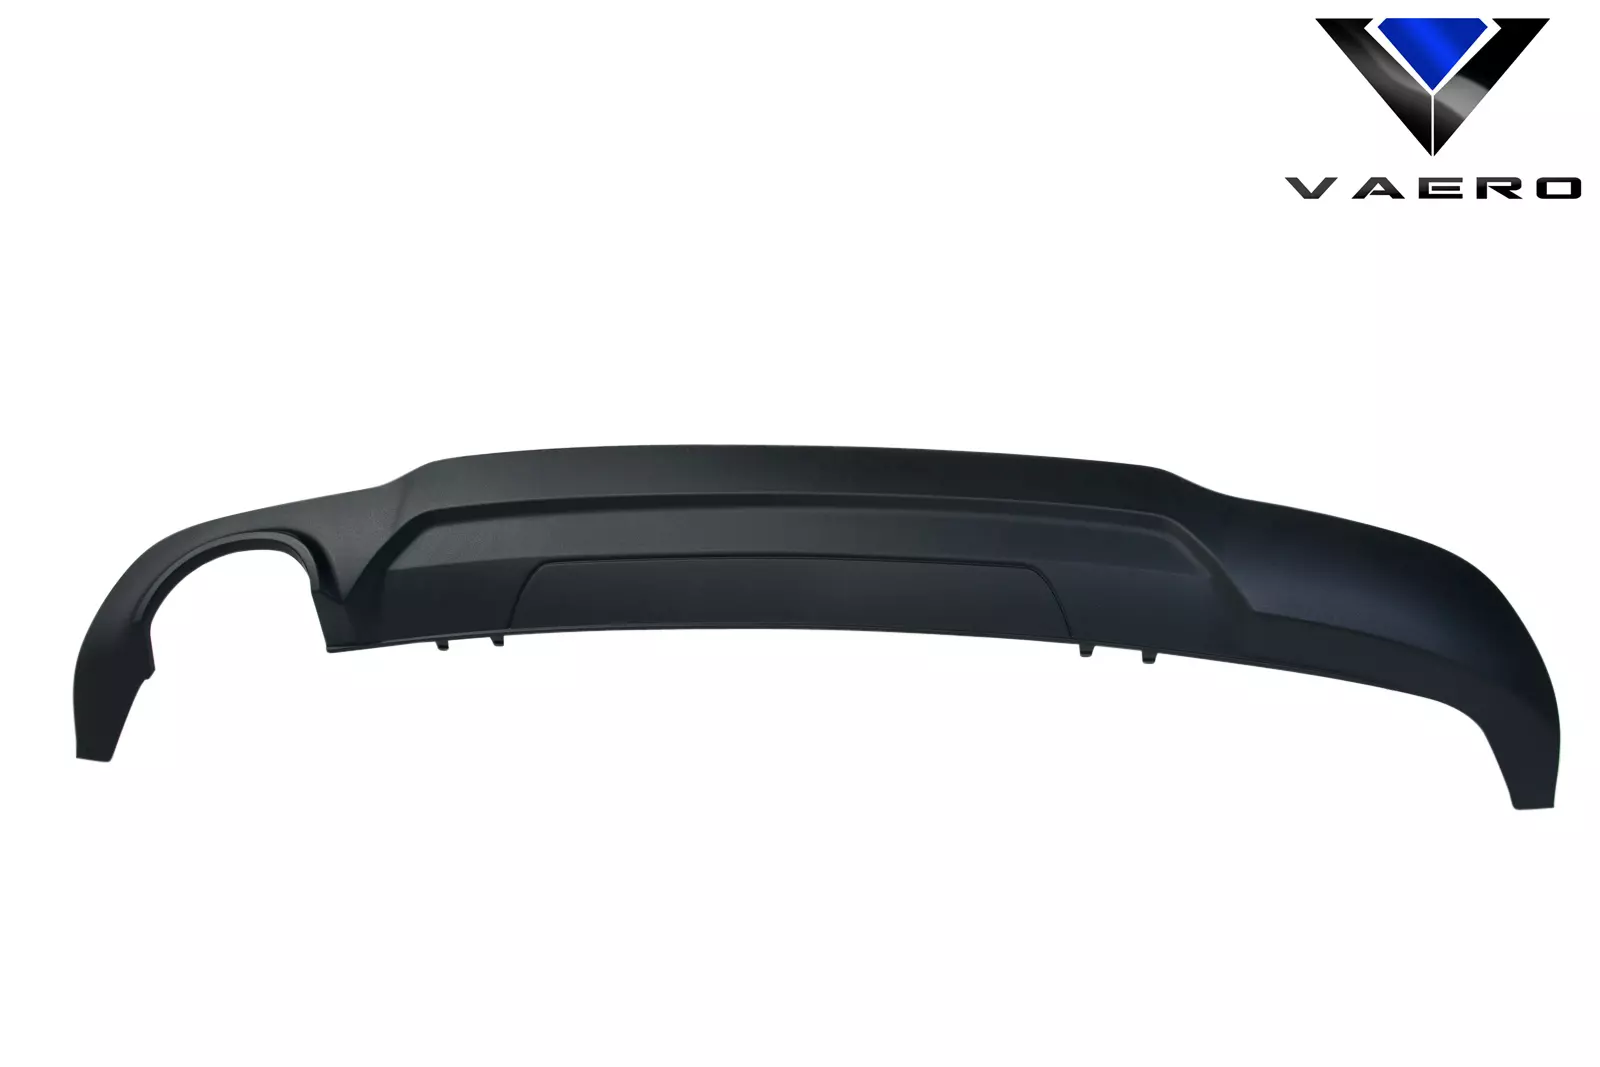 2008-2014 Mercedes C Class W204 C250 Vaero C63 V2 Look Rear Bumper Cover ( with PDC ) 2 Piece - Image 5